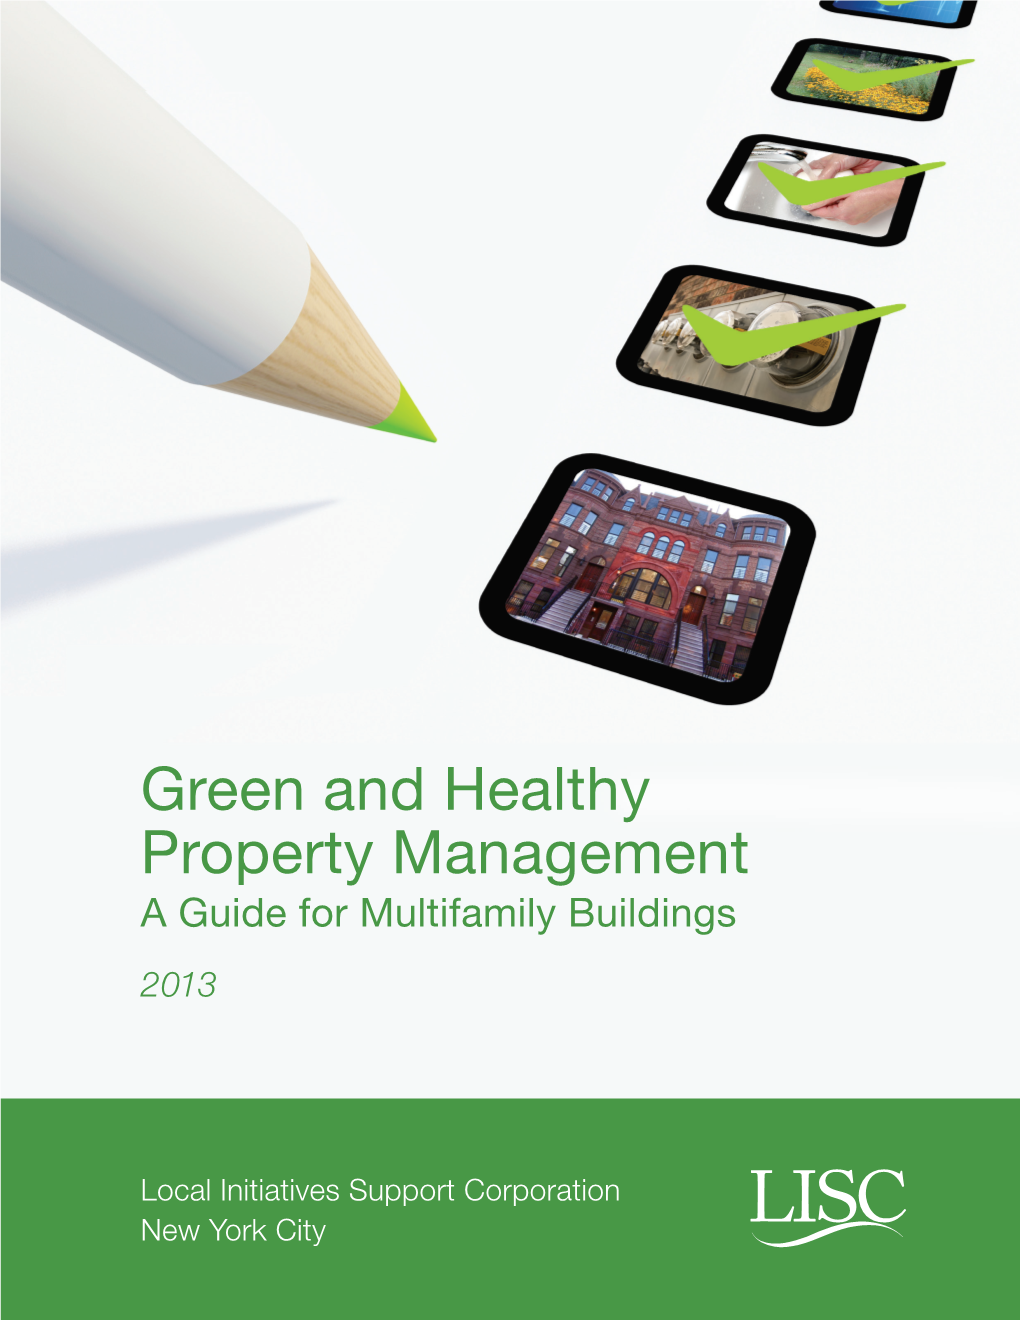 Green and Healthy Property Management a Guide for Multifamily Buildings 2013